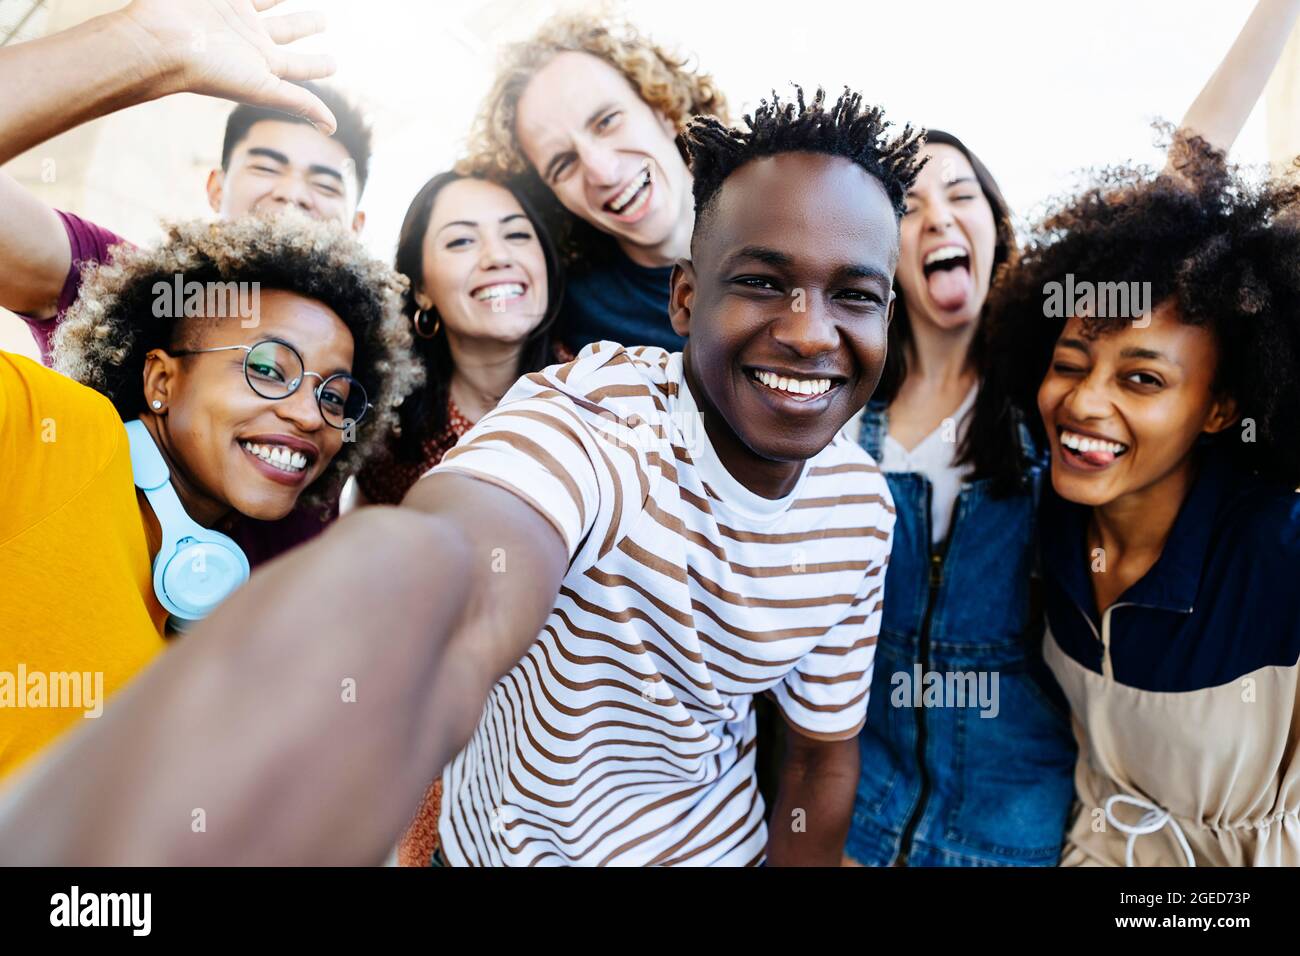 Group Of Multiracial Happy Best Friends Taking Selfie Photo With 